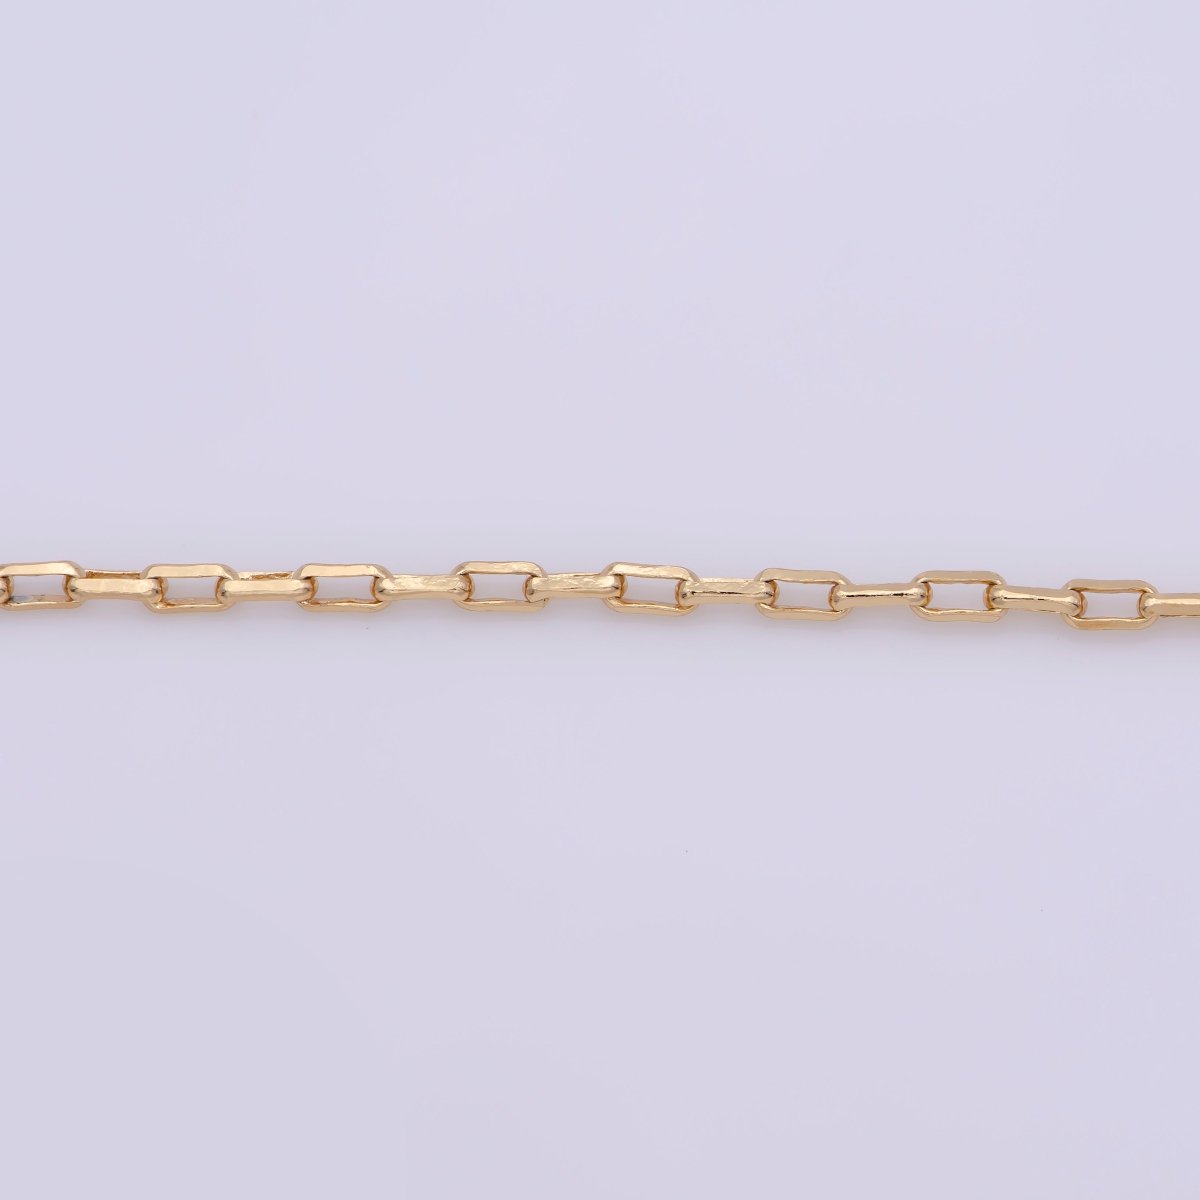 18K Gold Filled Cable Chain Necklace, 19.6 inch Cable Finished Chain For Jewelry Necklace Making, Dainty 2.5mm Cable Necklace w/ Lobster Clasps | CN-737 - DLUXCA